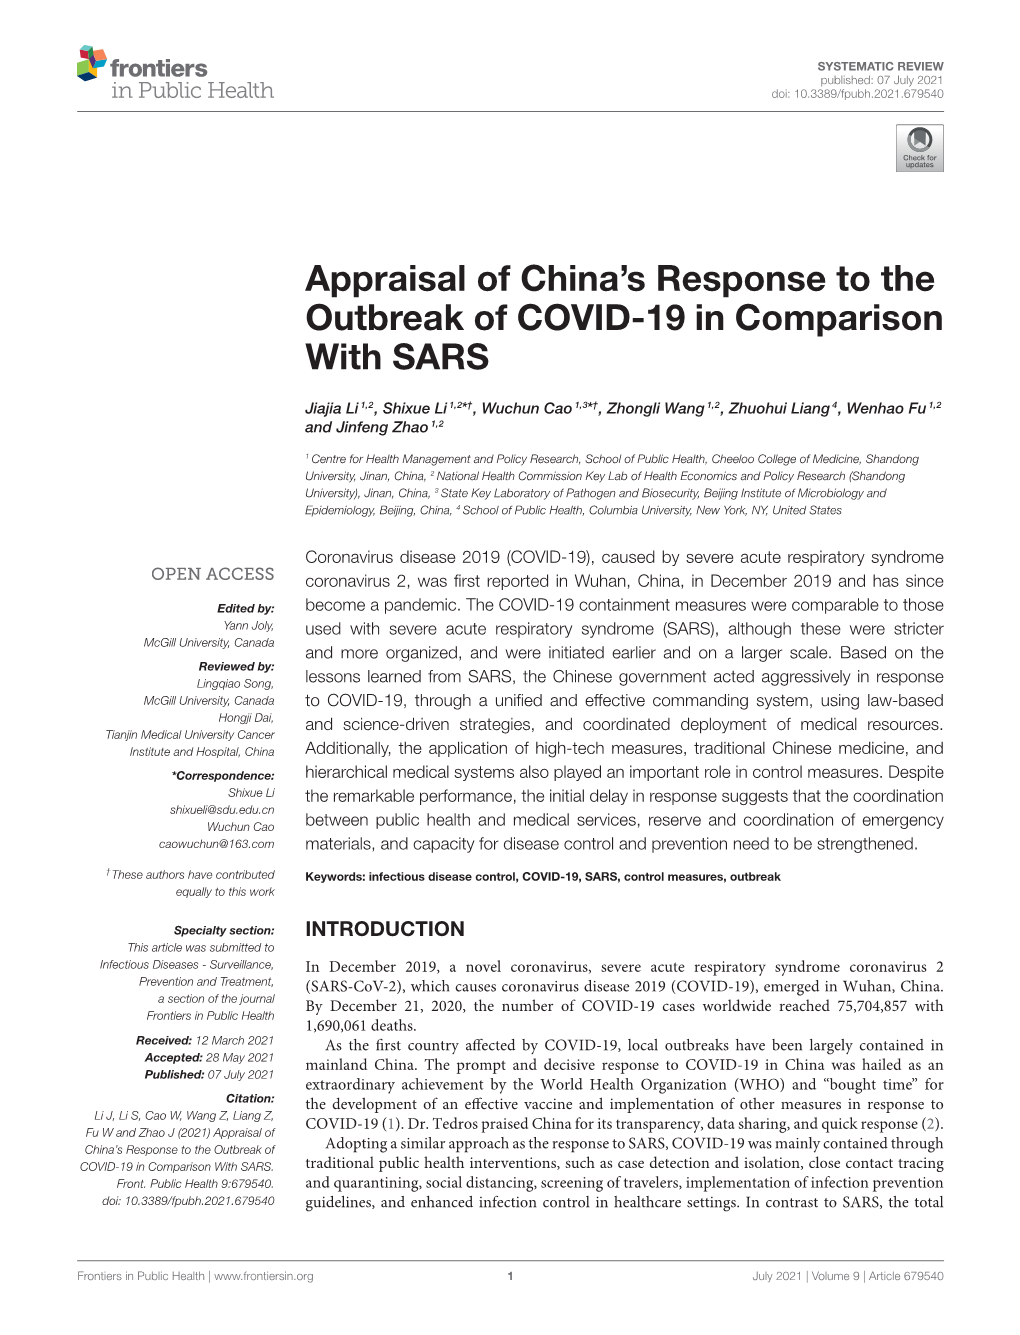 Appraisal of China's Response to the Outbreak of COVID-19 In